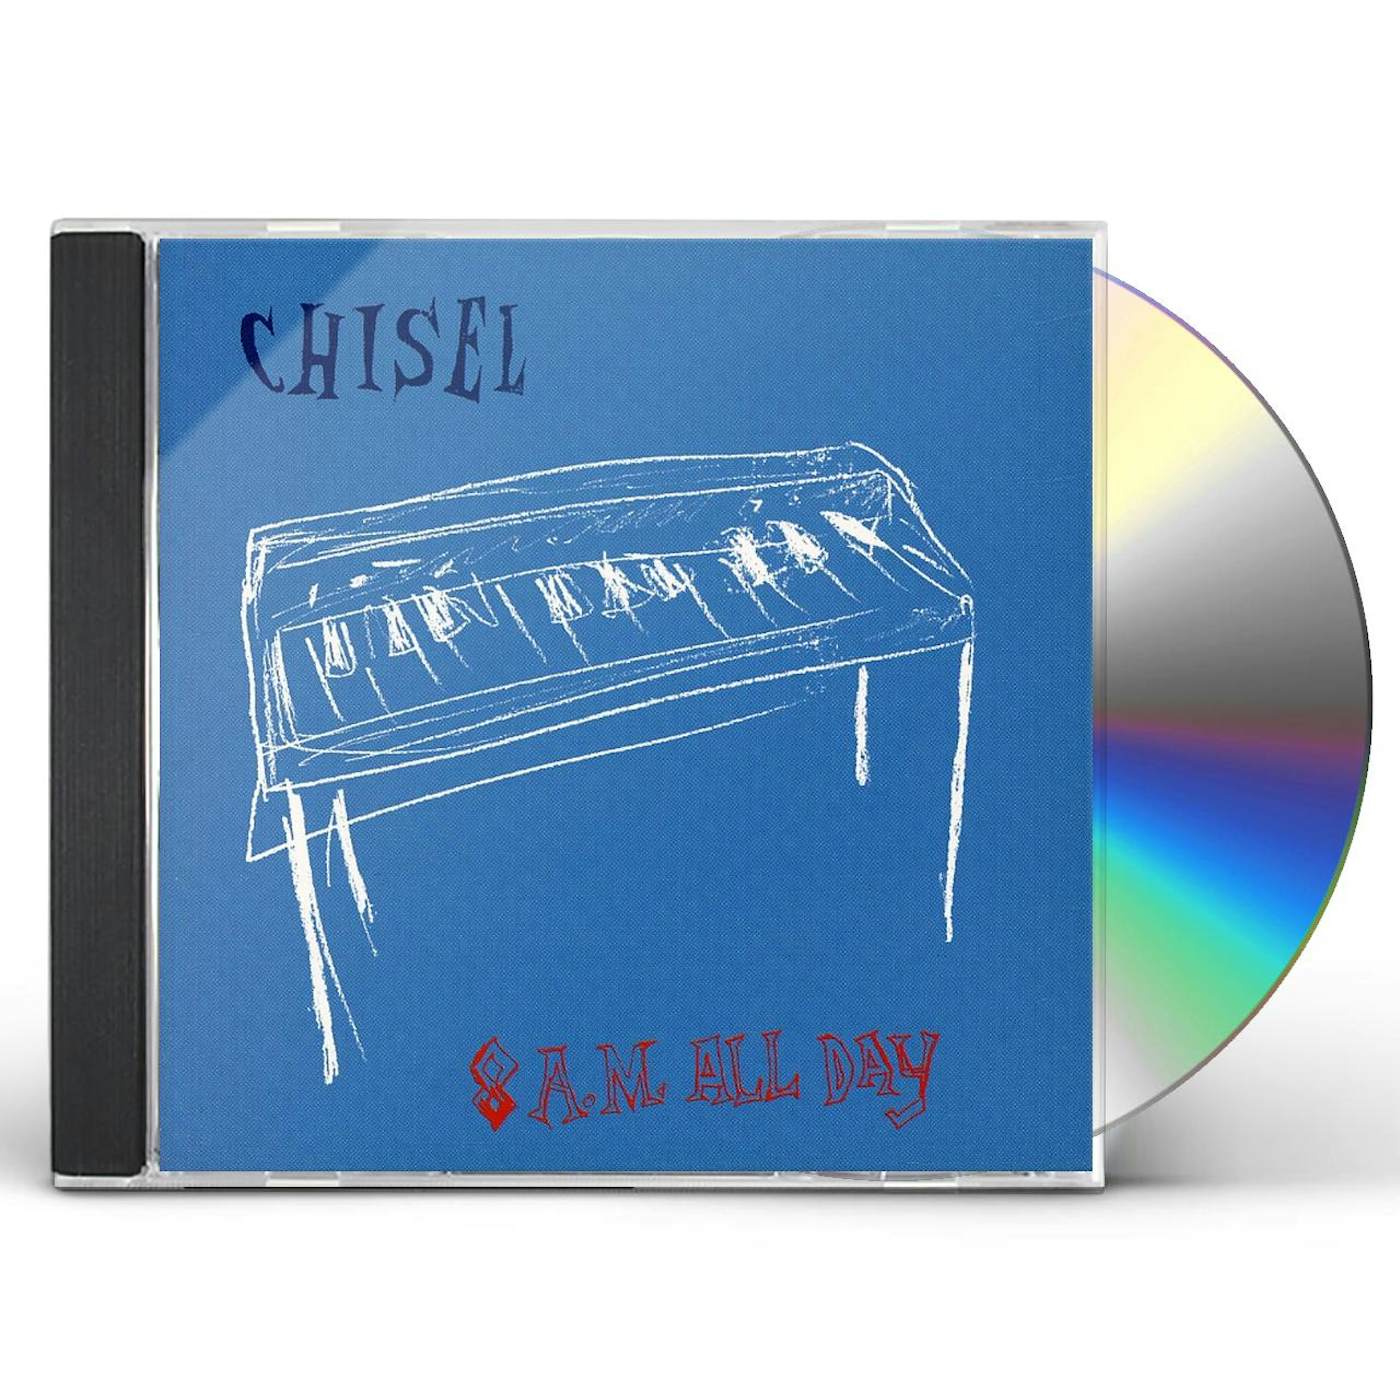 Chisel 8 AM ALL DAY CD